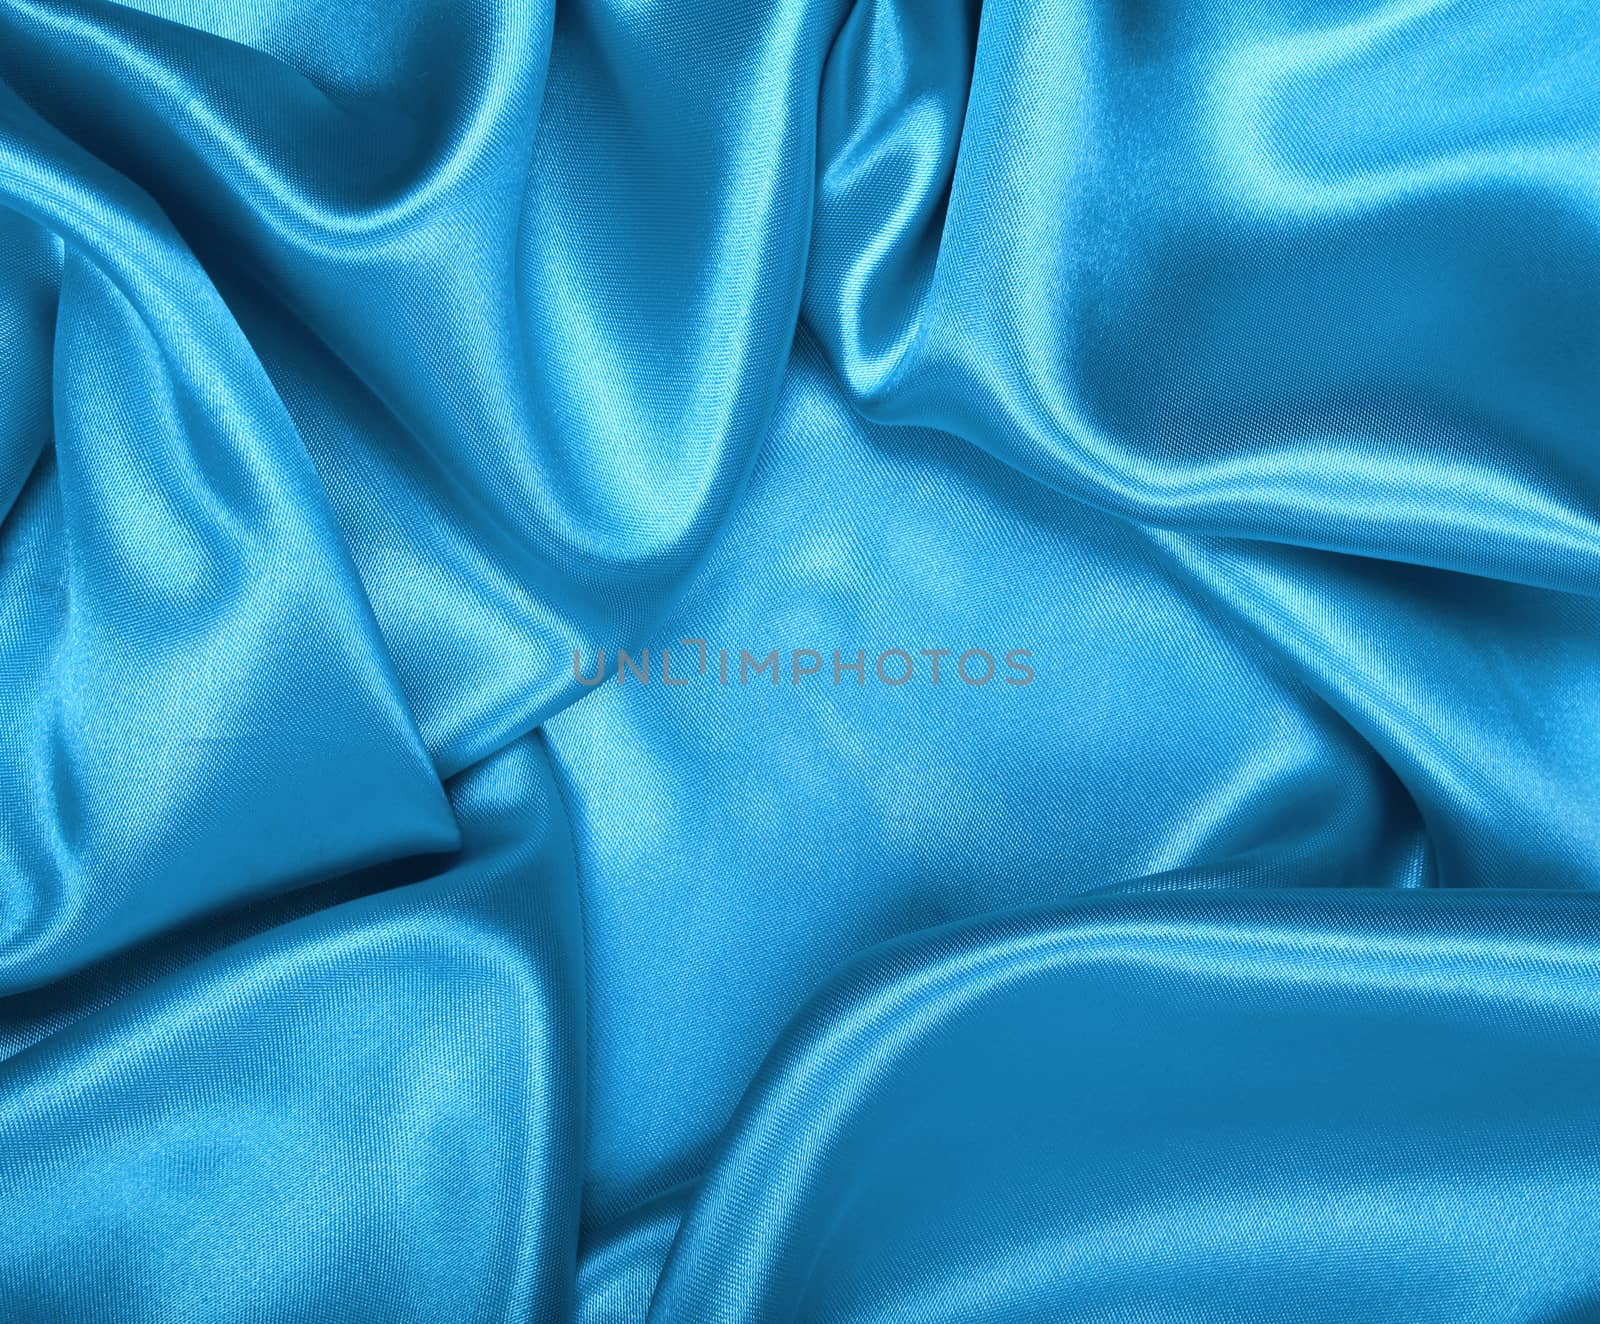 Smooth elegant blue silk or satin as background  by oxanatravel